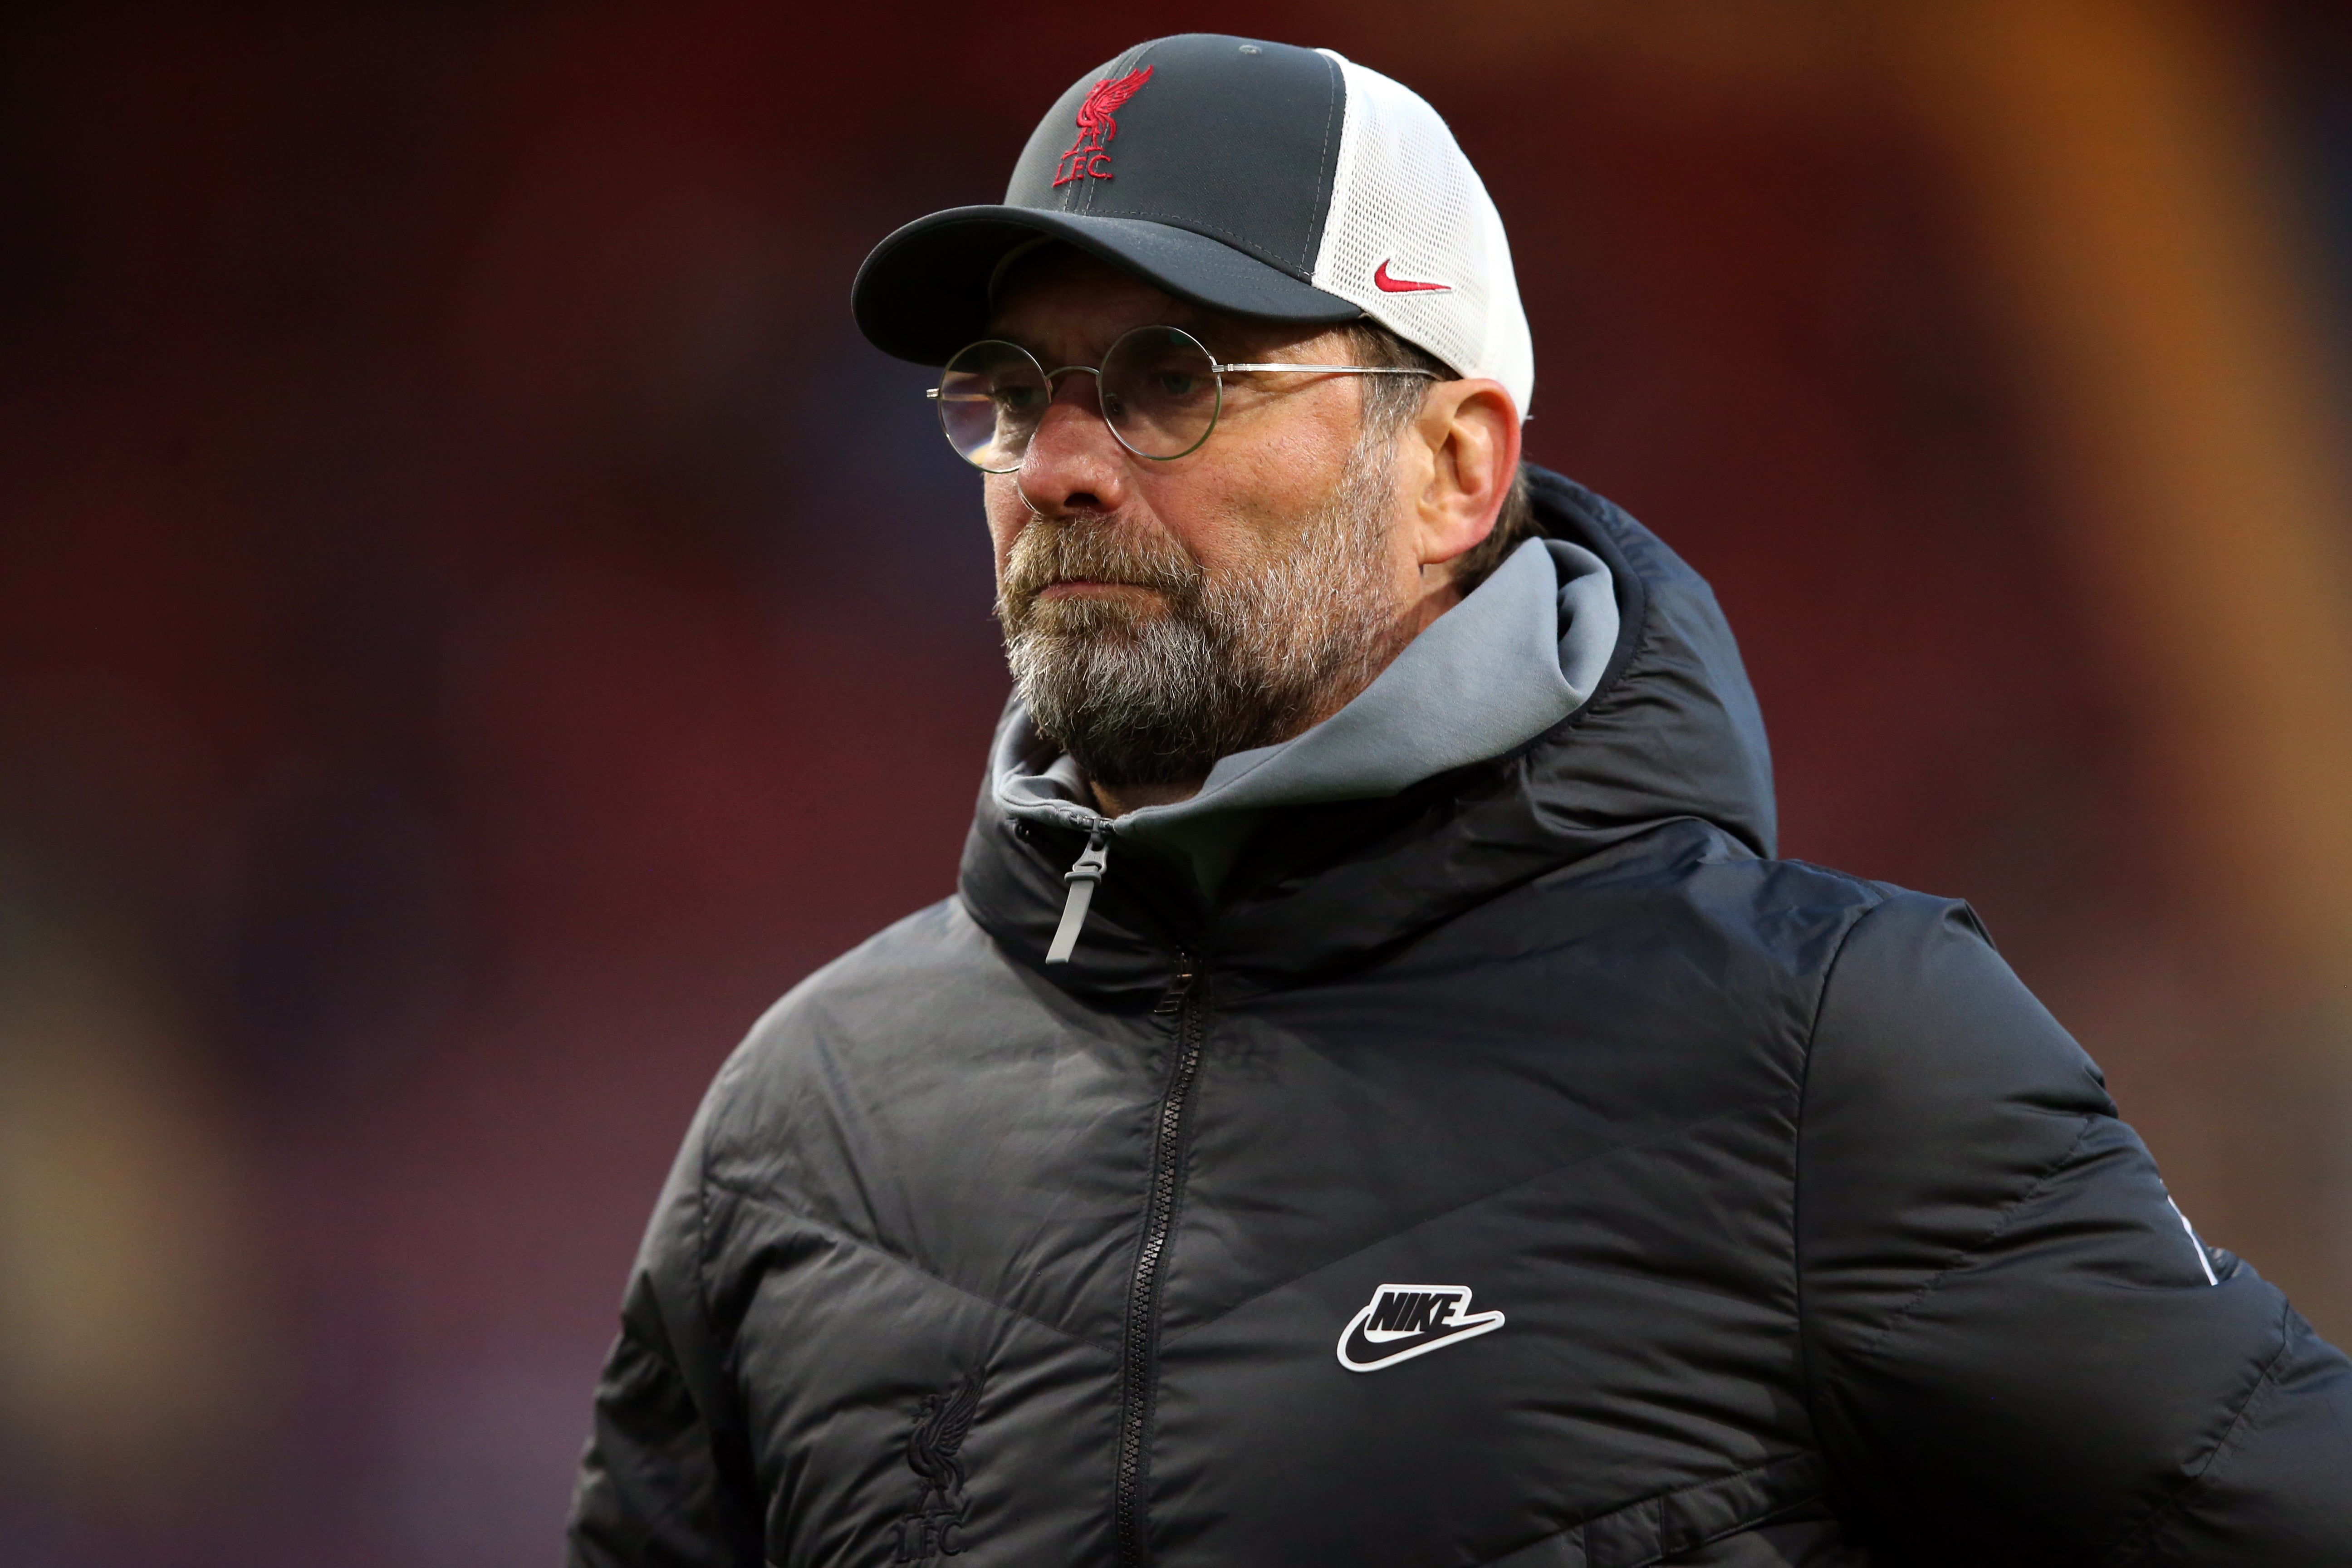 Klopp said he believed it was his personal responsibility to consider the lives of others